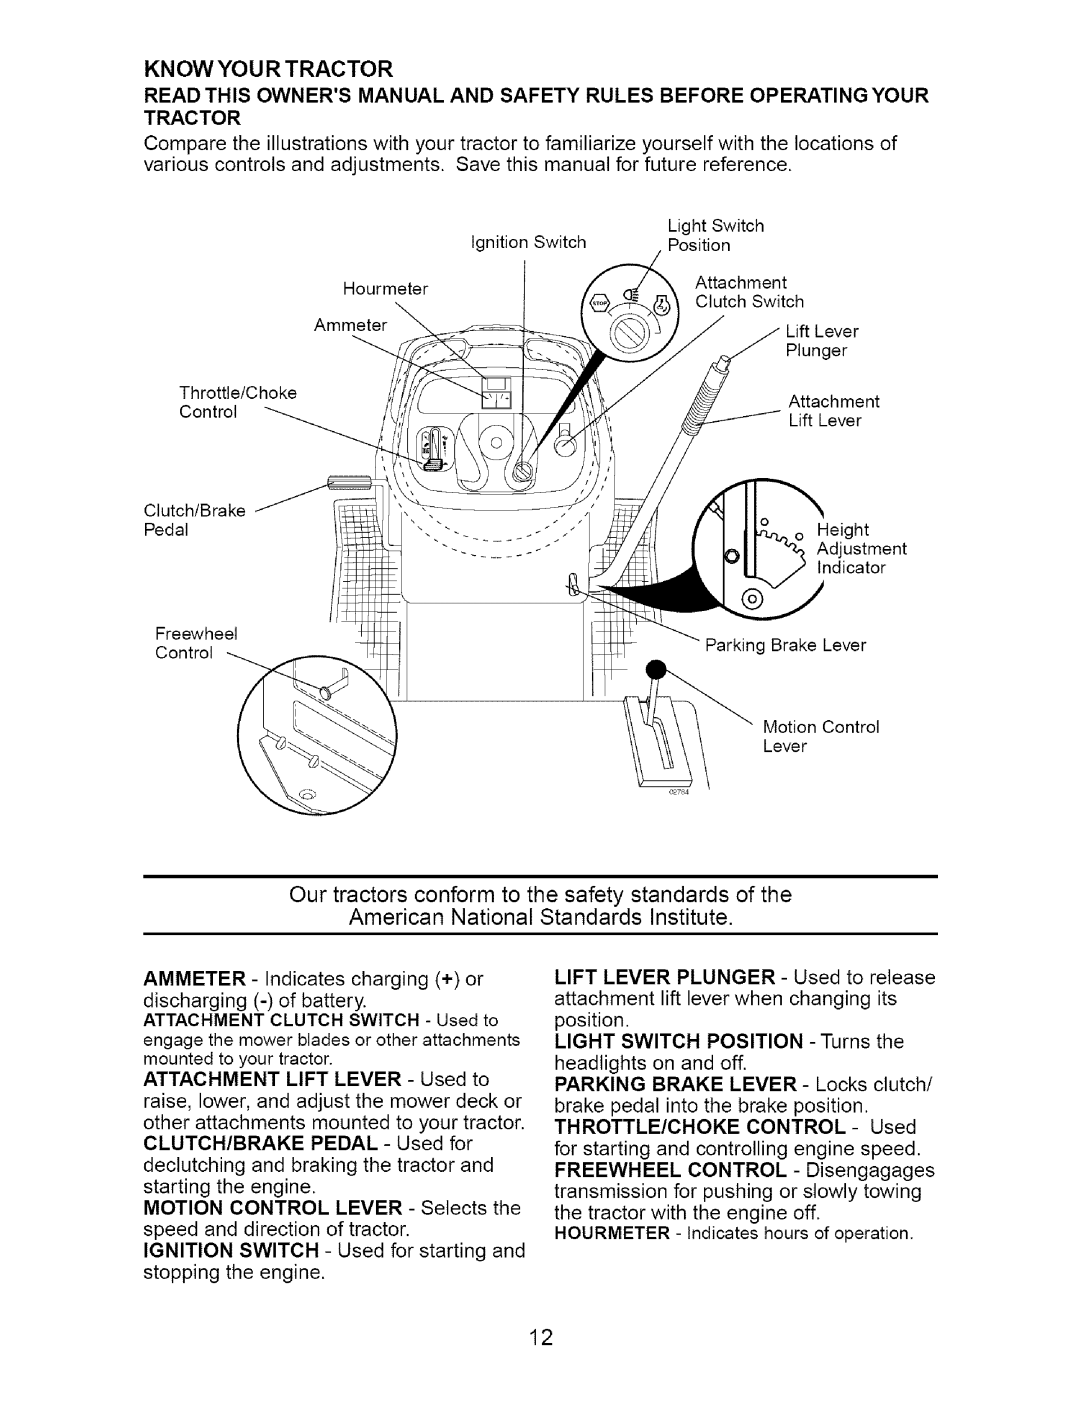 Craftsman 917.273642 manual Kn Ow You R Tractor, American National Standards Institute 